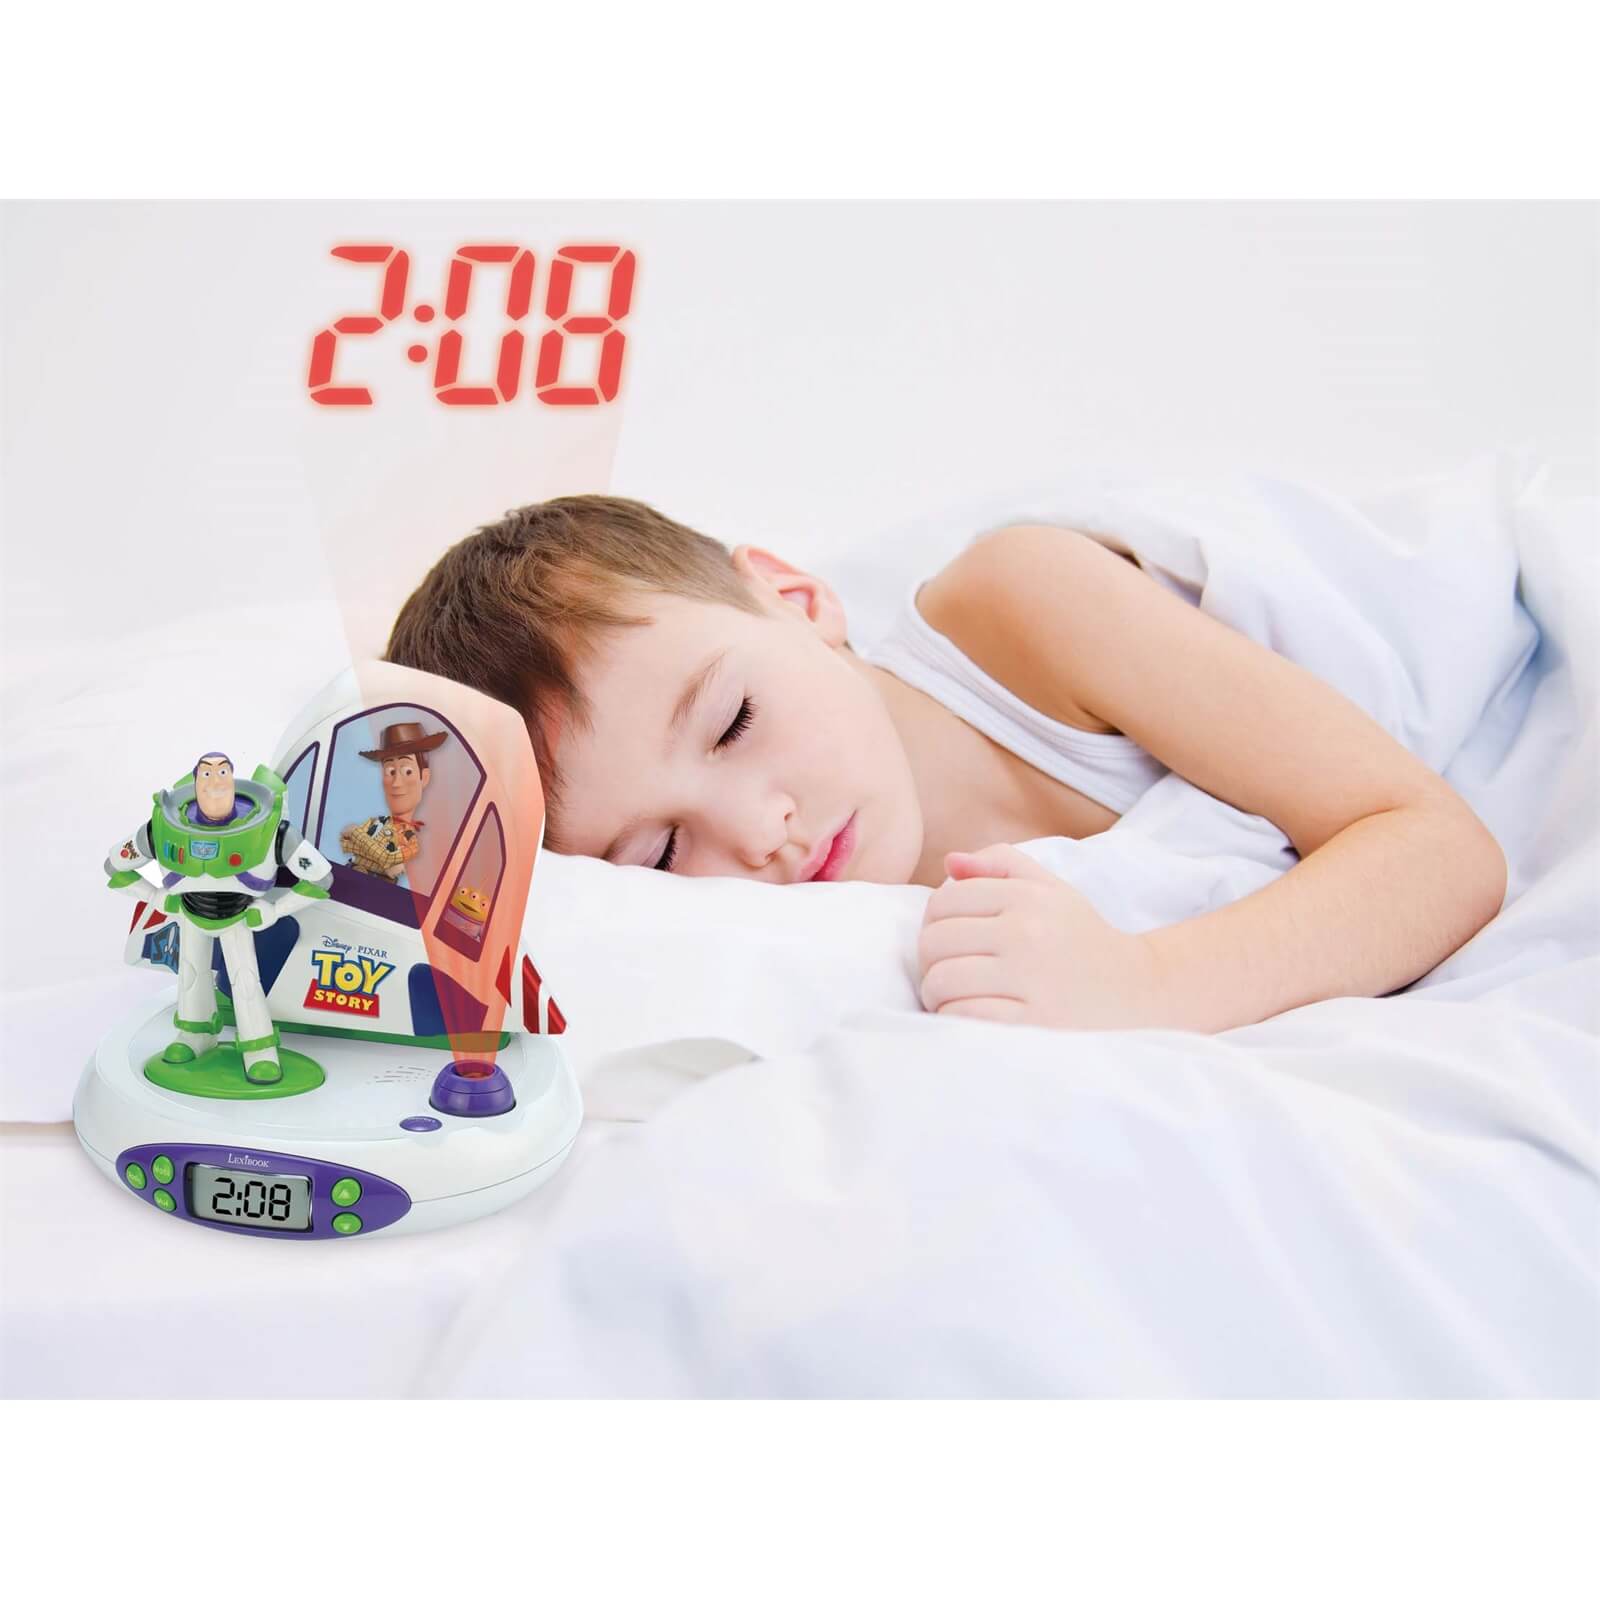 Disney Toy Story Projector Clock with Sounds